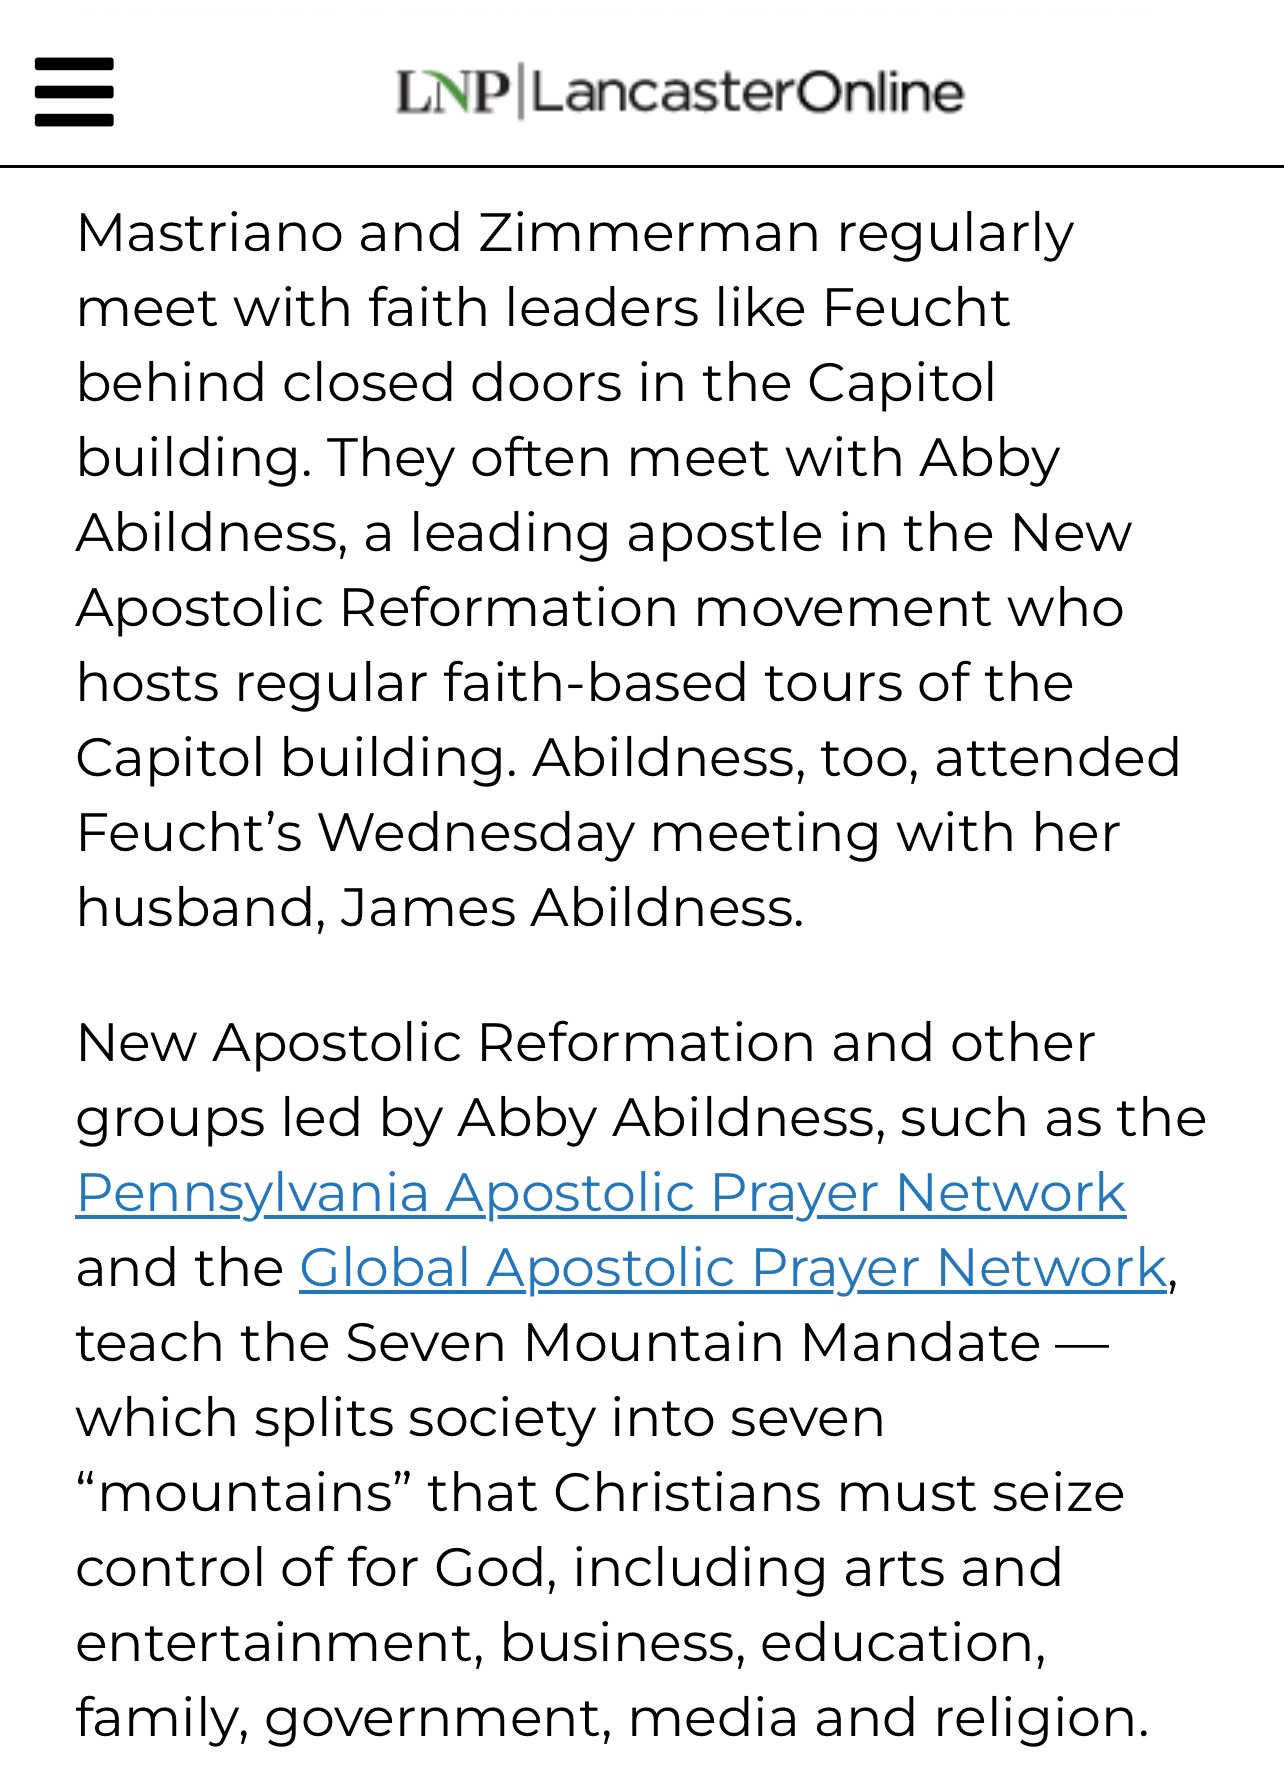 Screen capture of a news article that reads, "Mastriano and Zimmerman regularly meet with faith leaders like Feucht behind closed doors in the Capitol building. They often meet with Abby Abildness, a leading apostle in the New Apostolic Reformation movement who hosts regular faith-based tours of the Capitol building. Abildness, too, attended Feucht's Wednesday meeting with her husband, James Abildness. New Apostolic Reformation and other groups led by Abby Abildness, such as the Pennsylvania Apostolic Prayer Network and the Global Apostolic Prayer Network, teach the Seven Mountain Mandate - which splits society into seven "mountains" that Christians must seize control of for God, including arts and entertainment, business, education, family, government, media and religion."